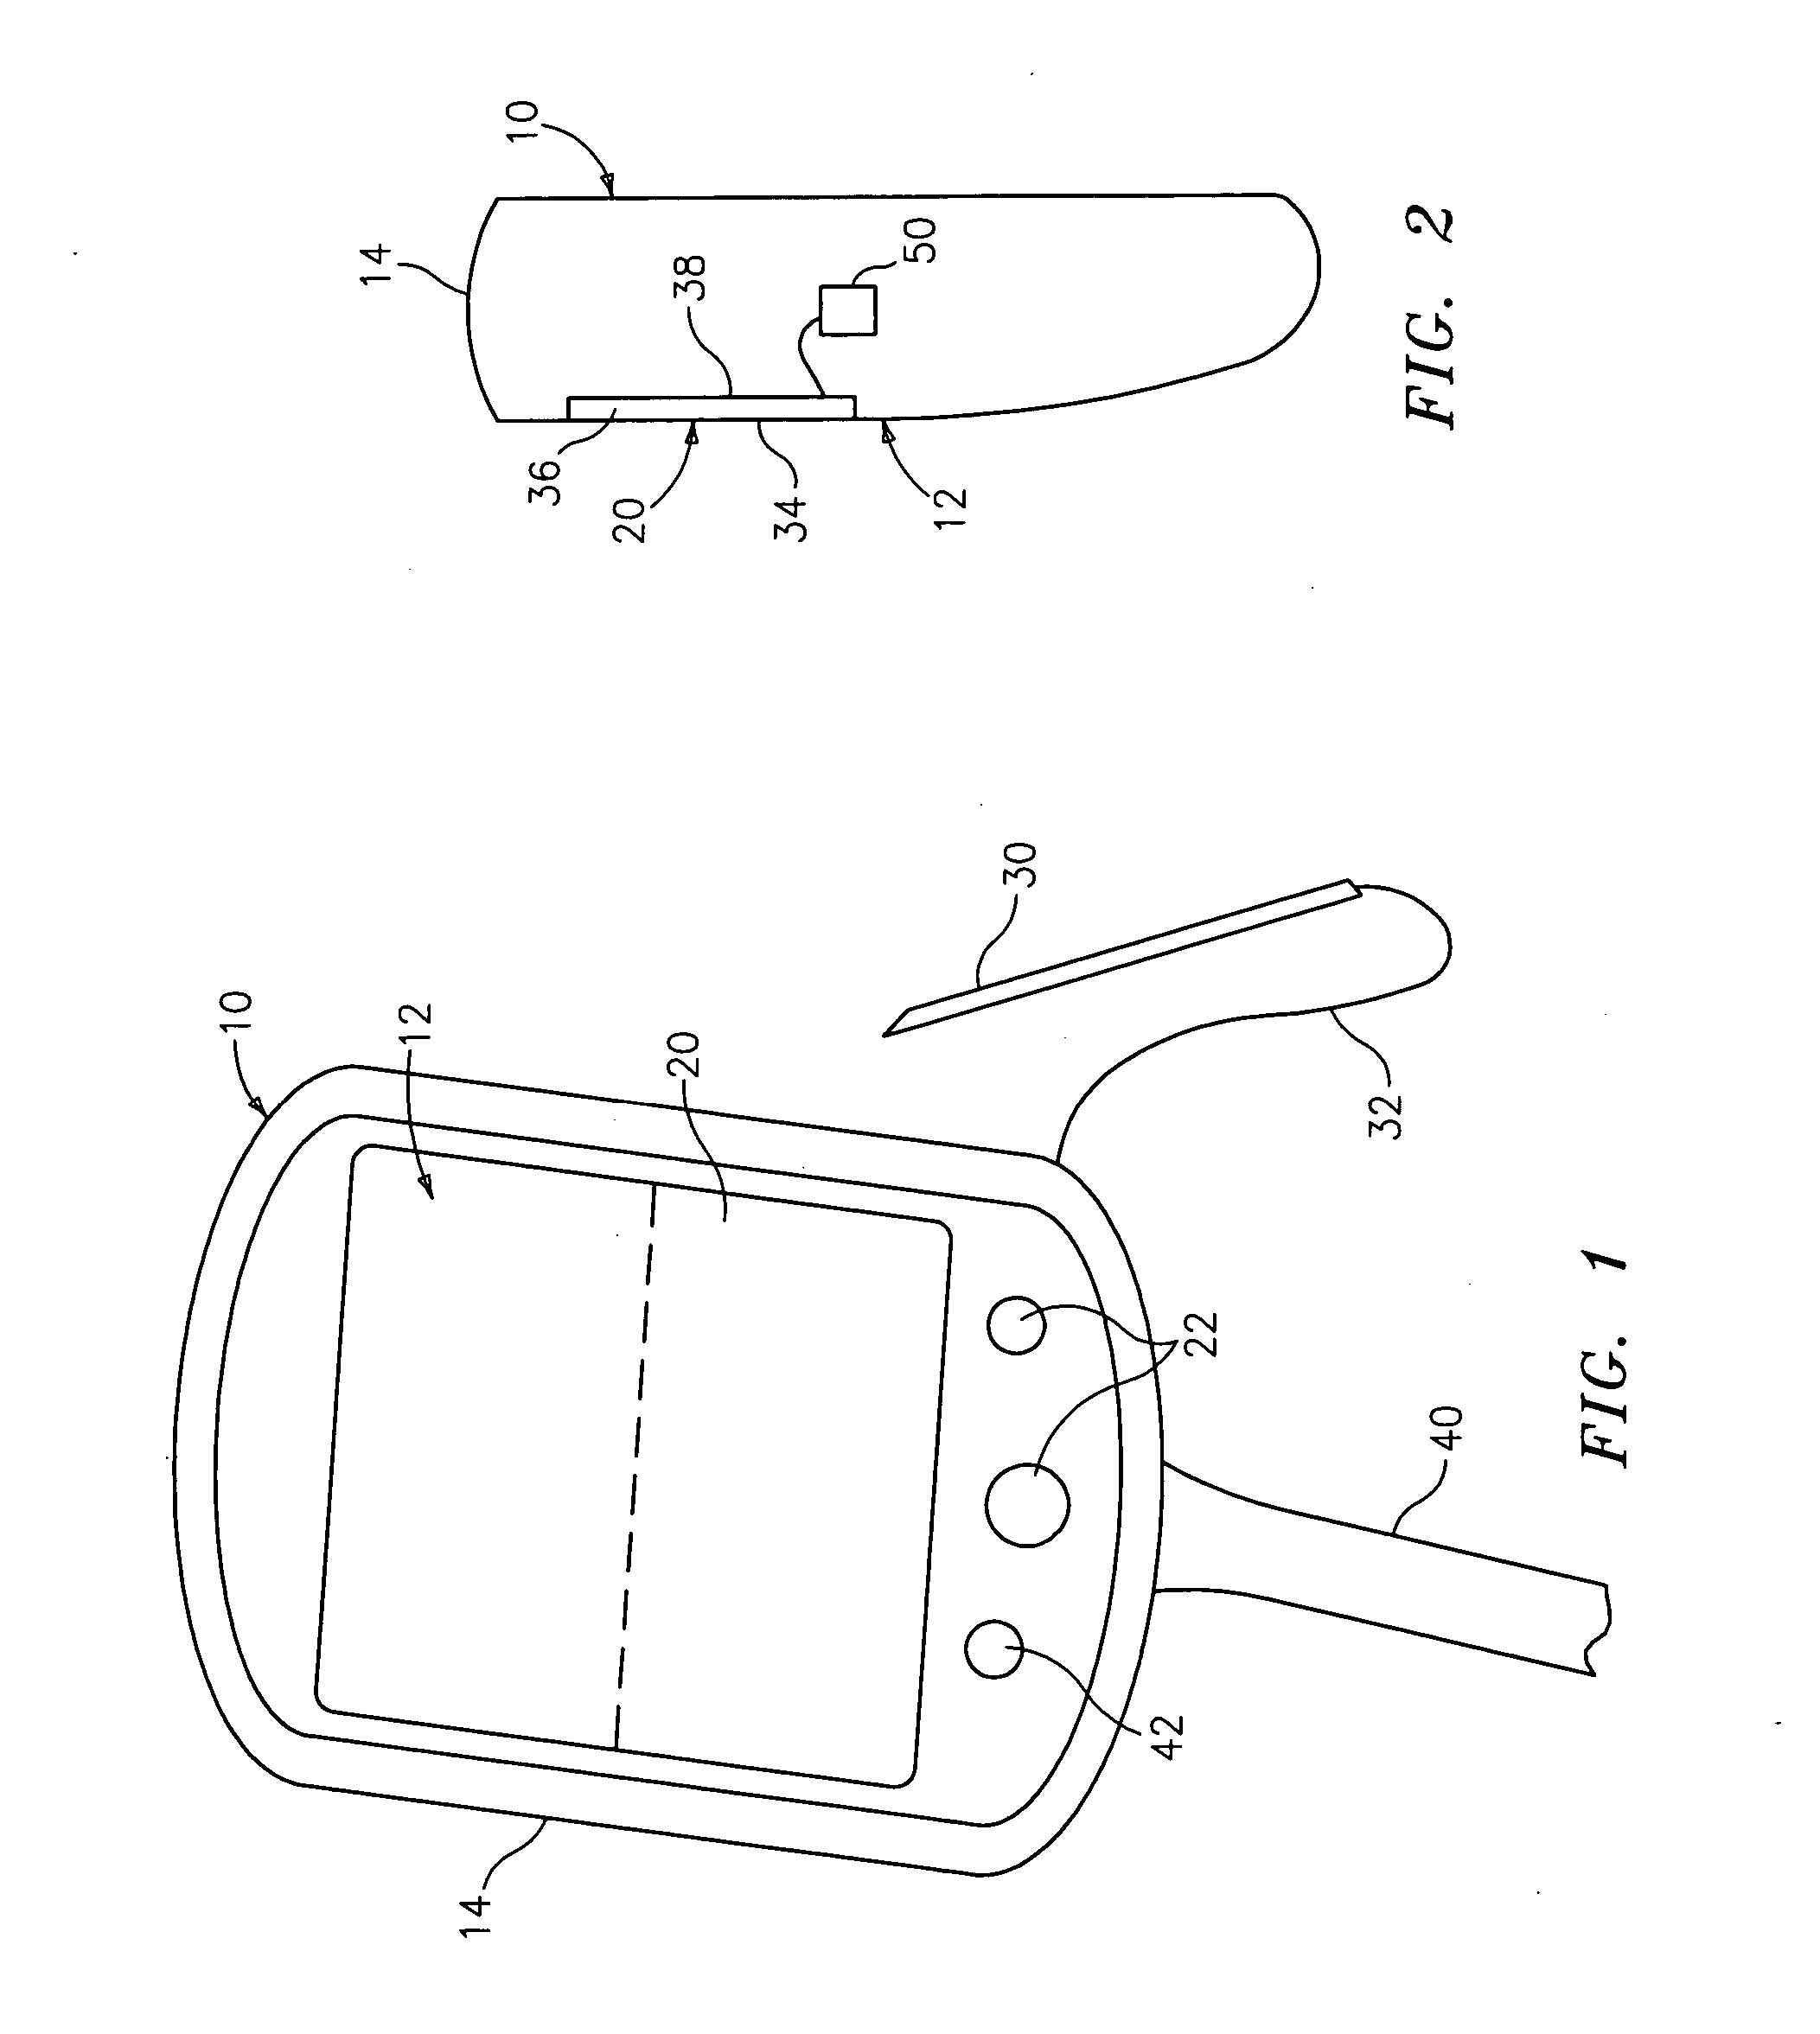 Apparatus and method for capturing site data while scuba diving